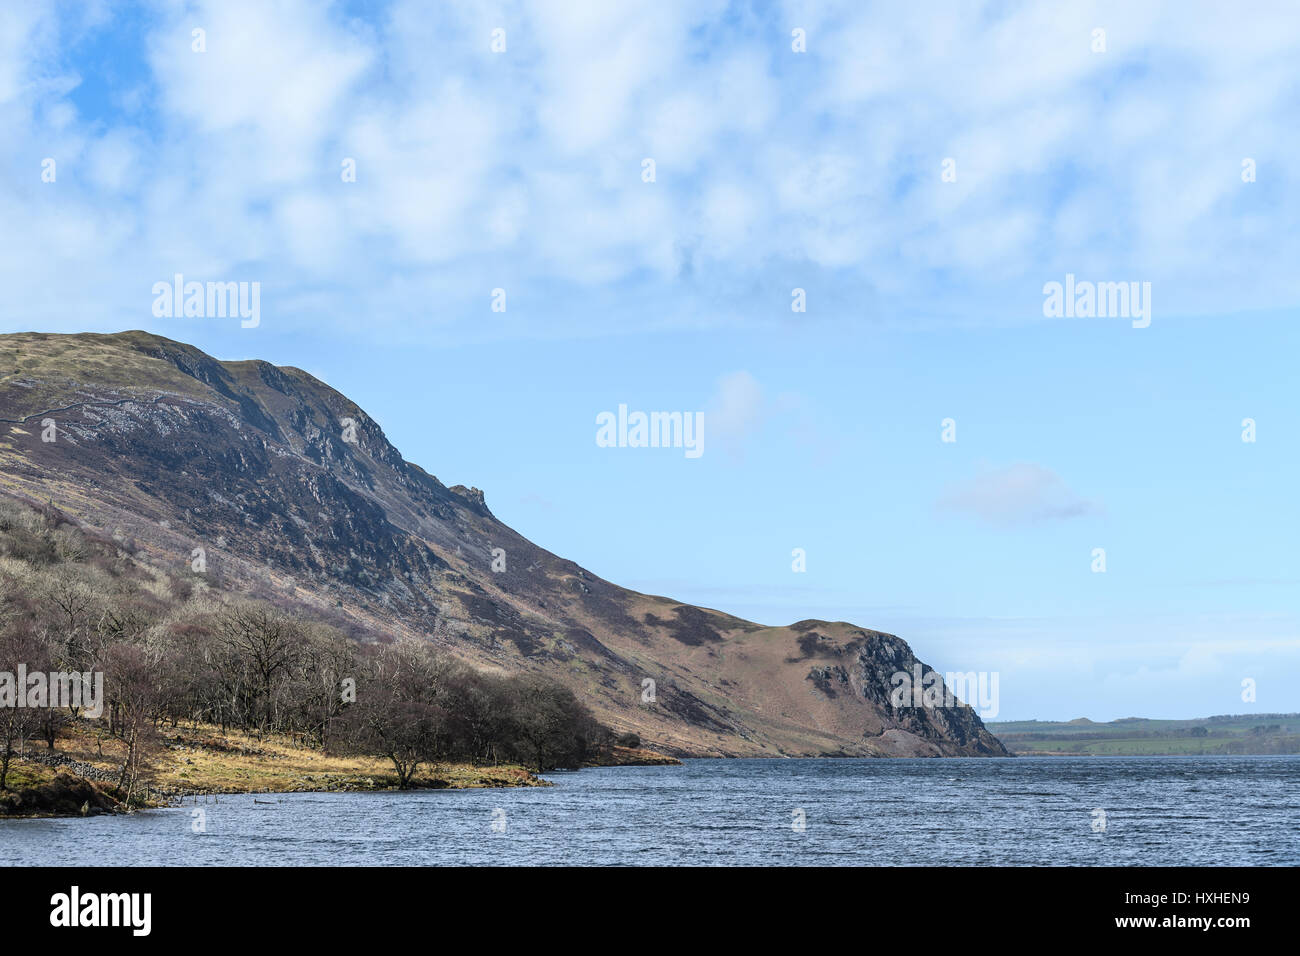 Crag Fell and Angler's Crag at Ennerdale Water (lake), Lake District, Cumbria, England. Stock Photo